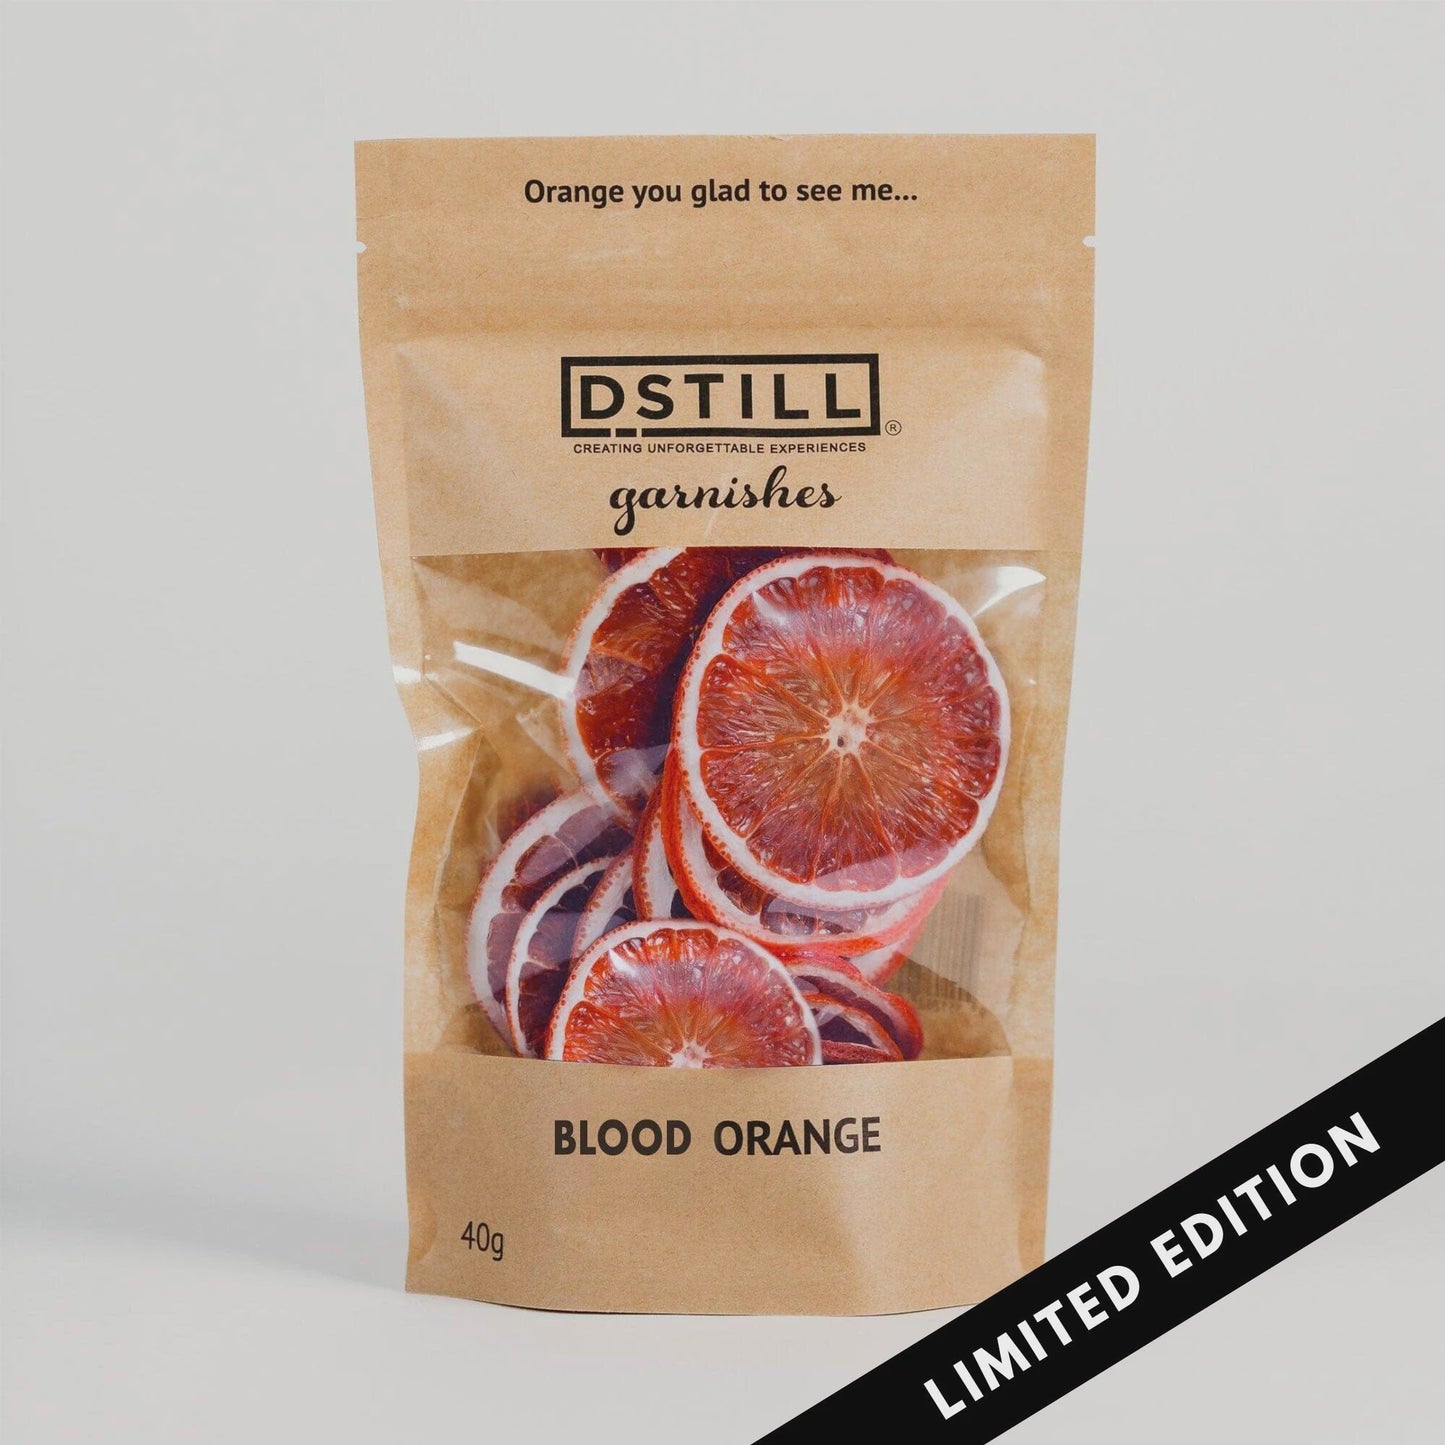 Introducing our newest addition.. Blood Oranges! Our Dried Blood Orange Cocktail Garnishes are made with love and from 100% Australian ingredients. Hand-sliced and dehydrated at our headquarters in the sunny Gold Coast, quality control is our top priority!